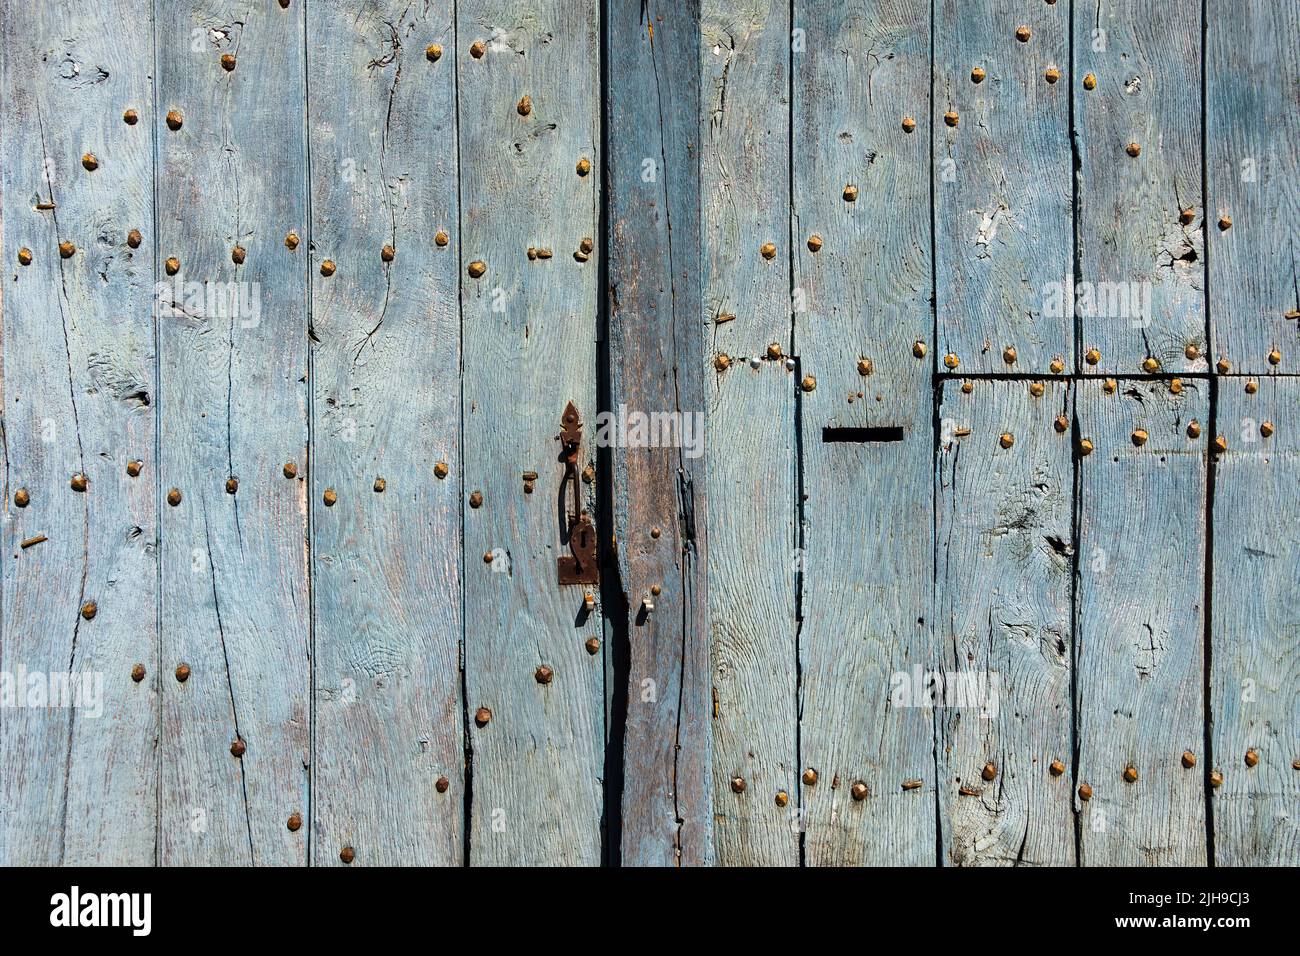 Old double garage doors studded with iron nails - La Roche Posay, Vienne (86), France. Stock Photo